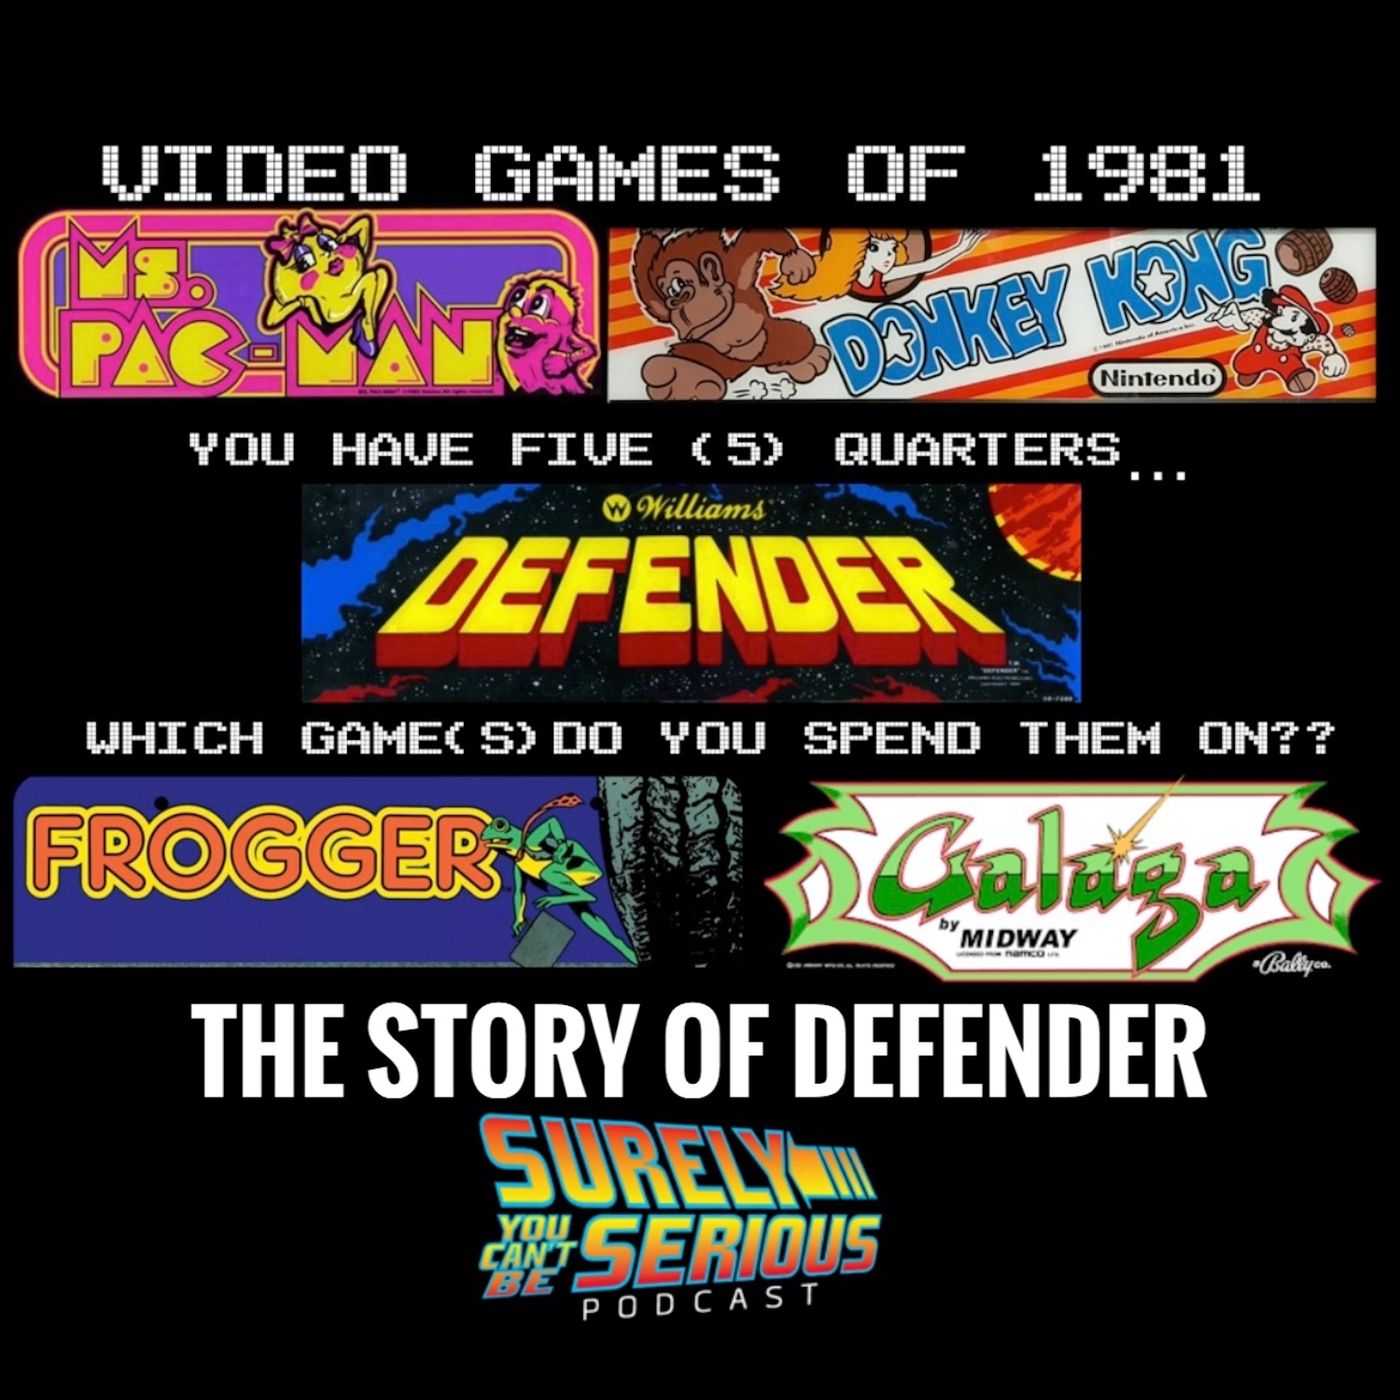 The Video Games of 1981 - Level 5: Defender Image